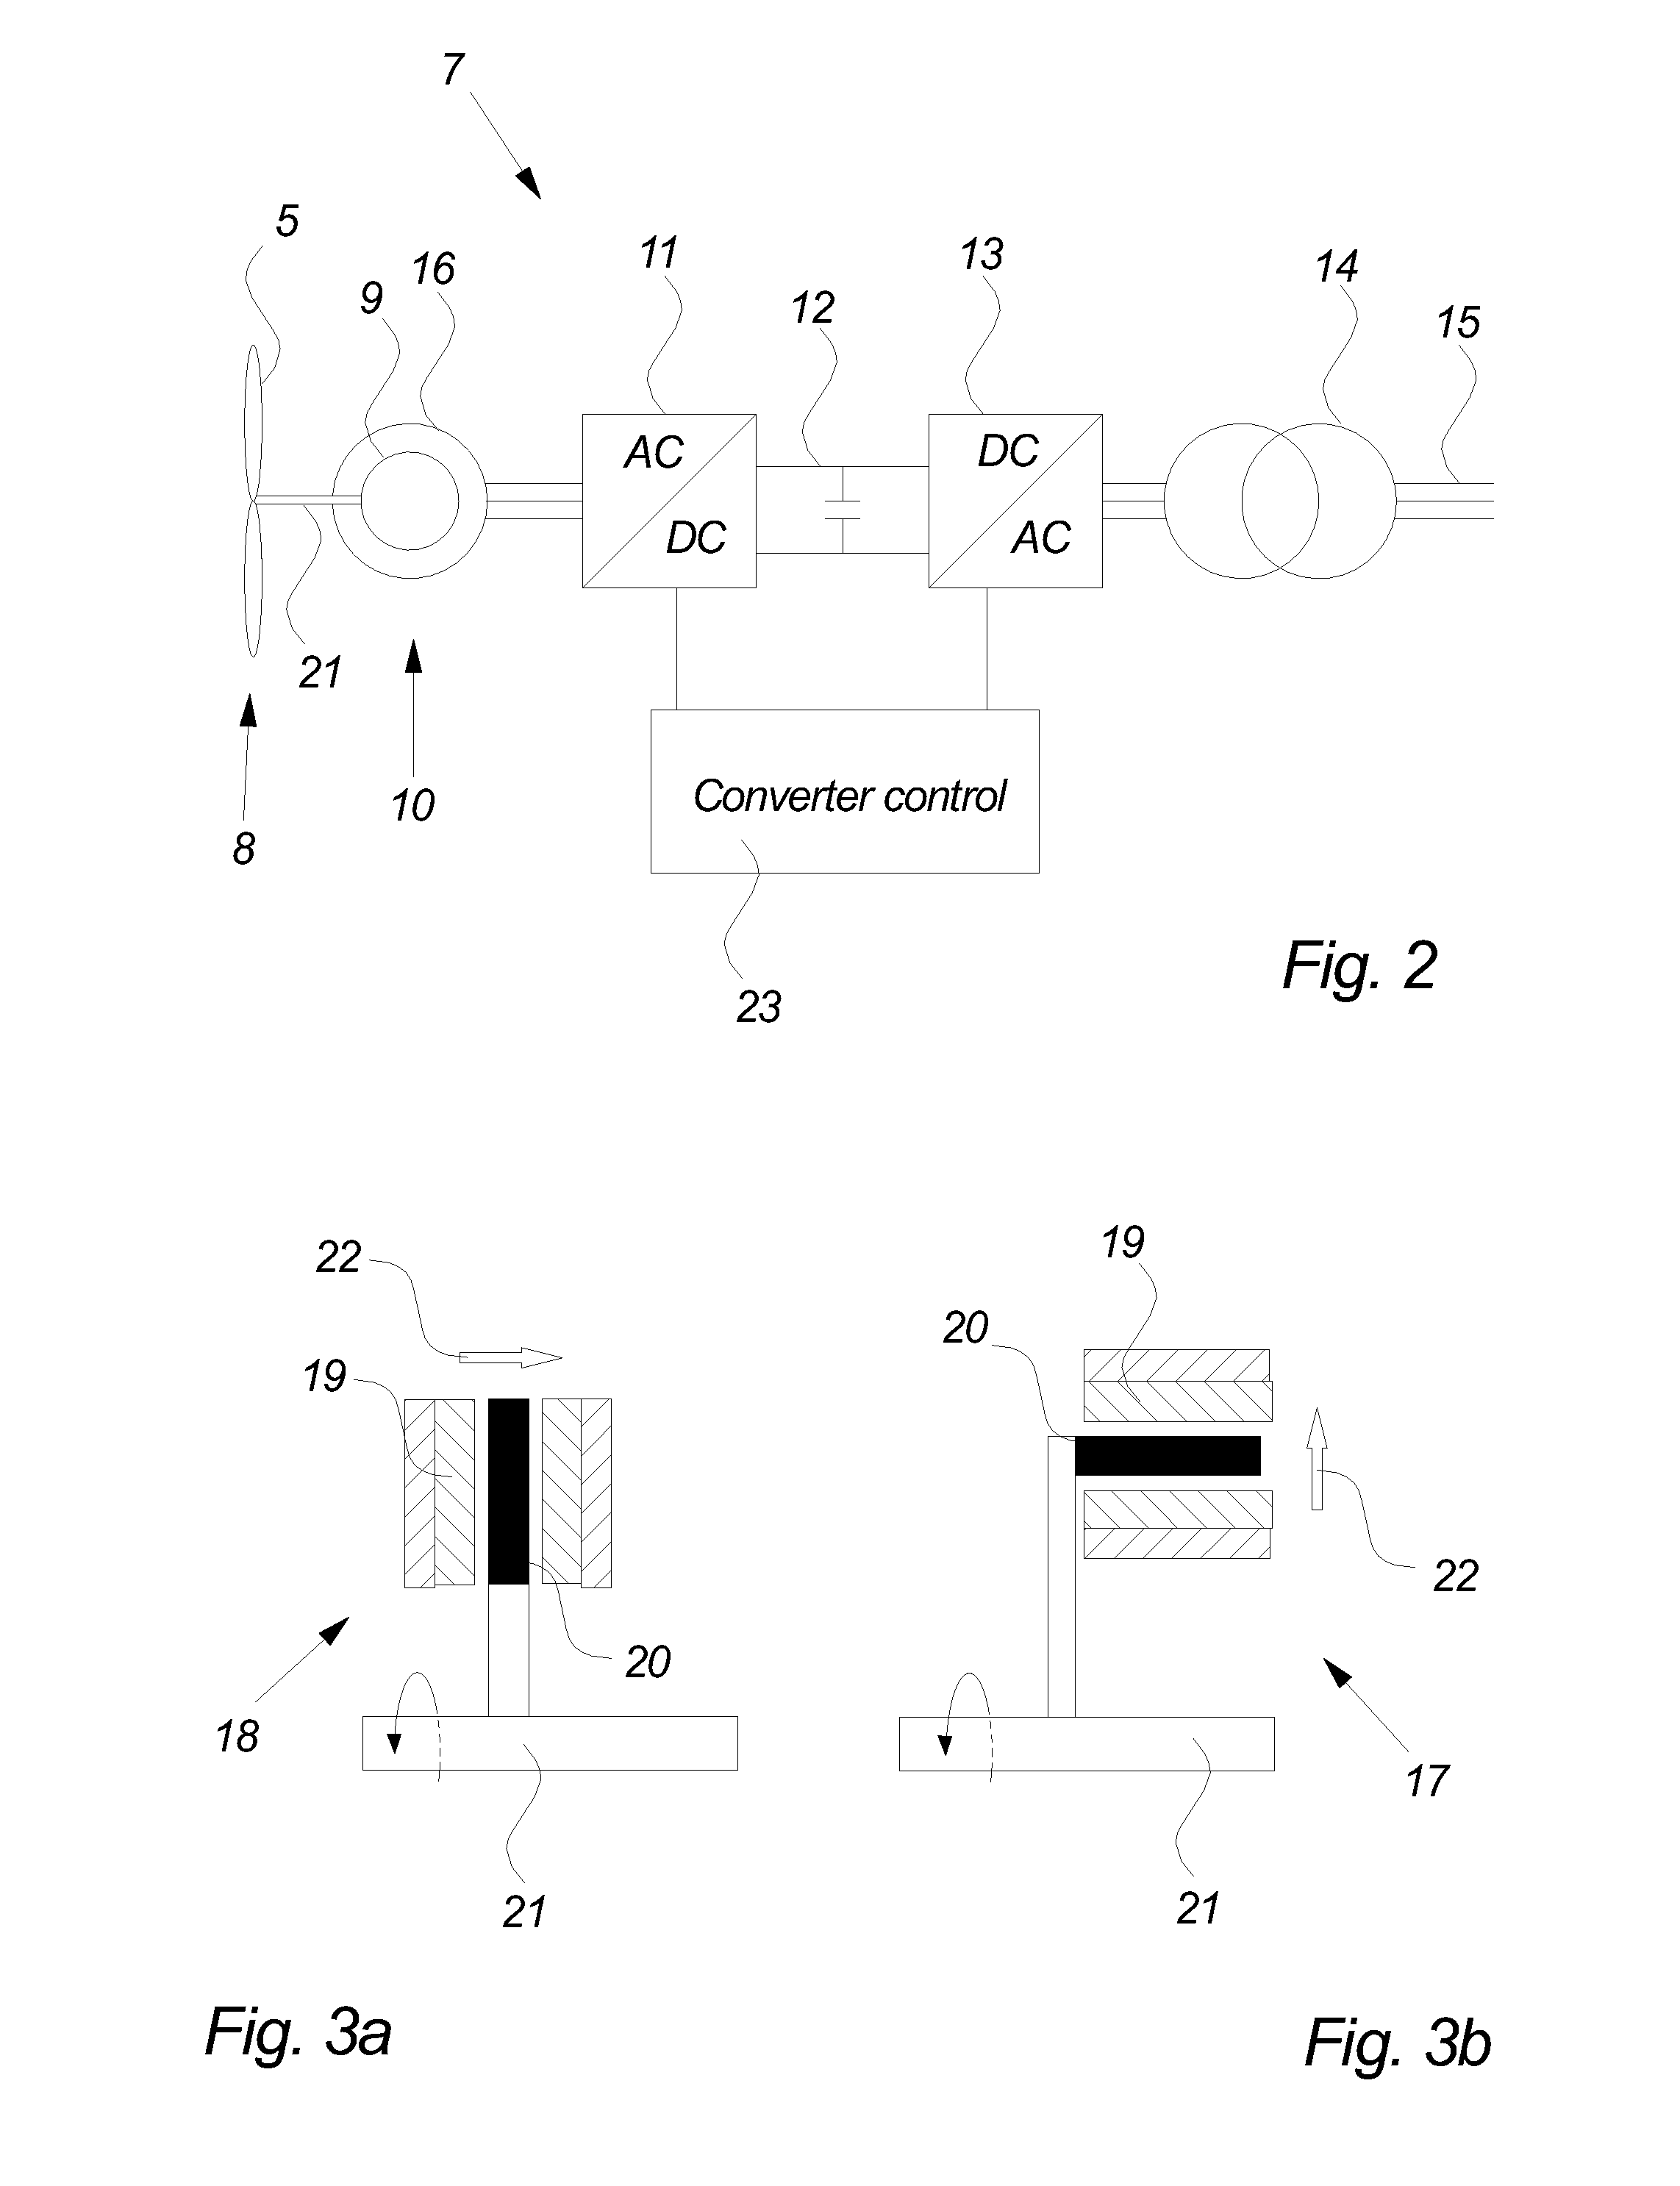 Method For Establishing A Wind Turbine Generator With One Or More Permanent Magnet (PM) Rotors, Wind Turbine Nacelle And Wind Turbine